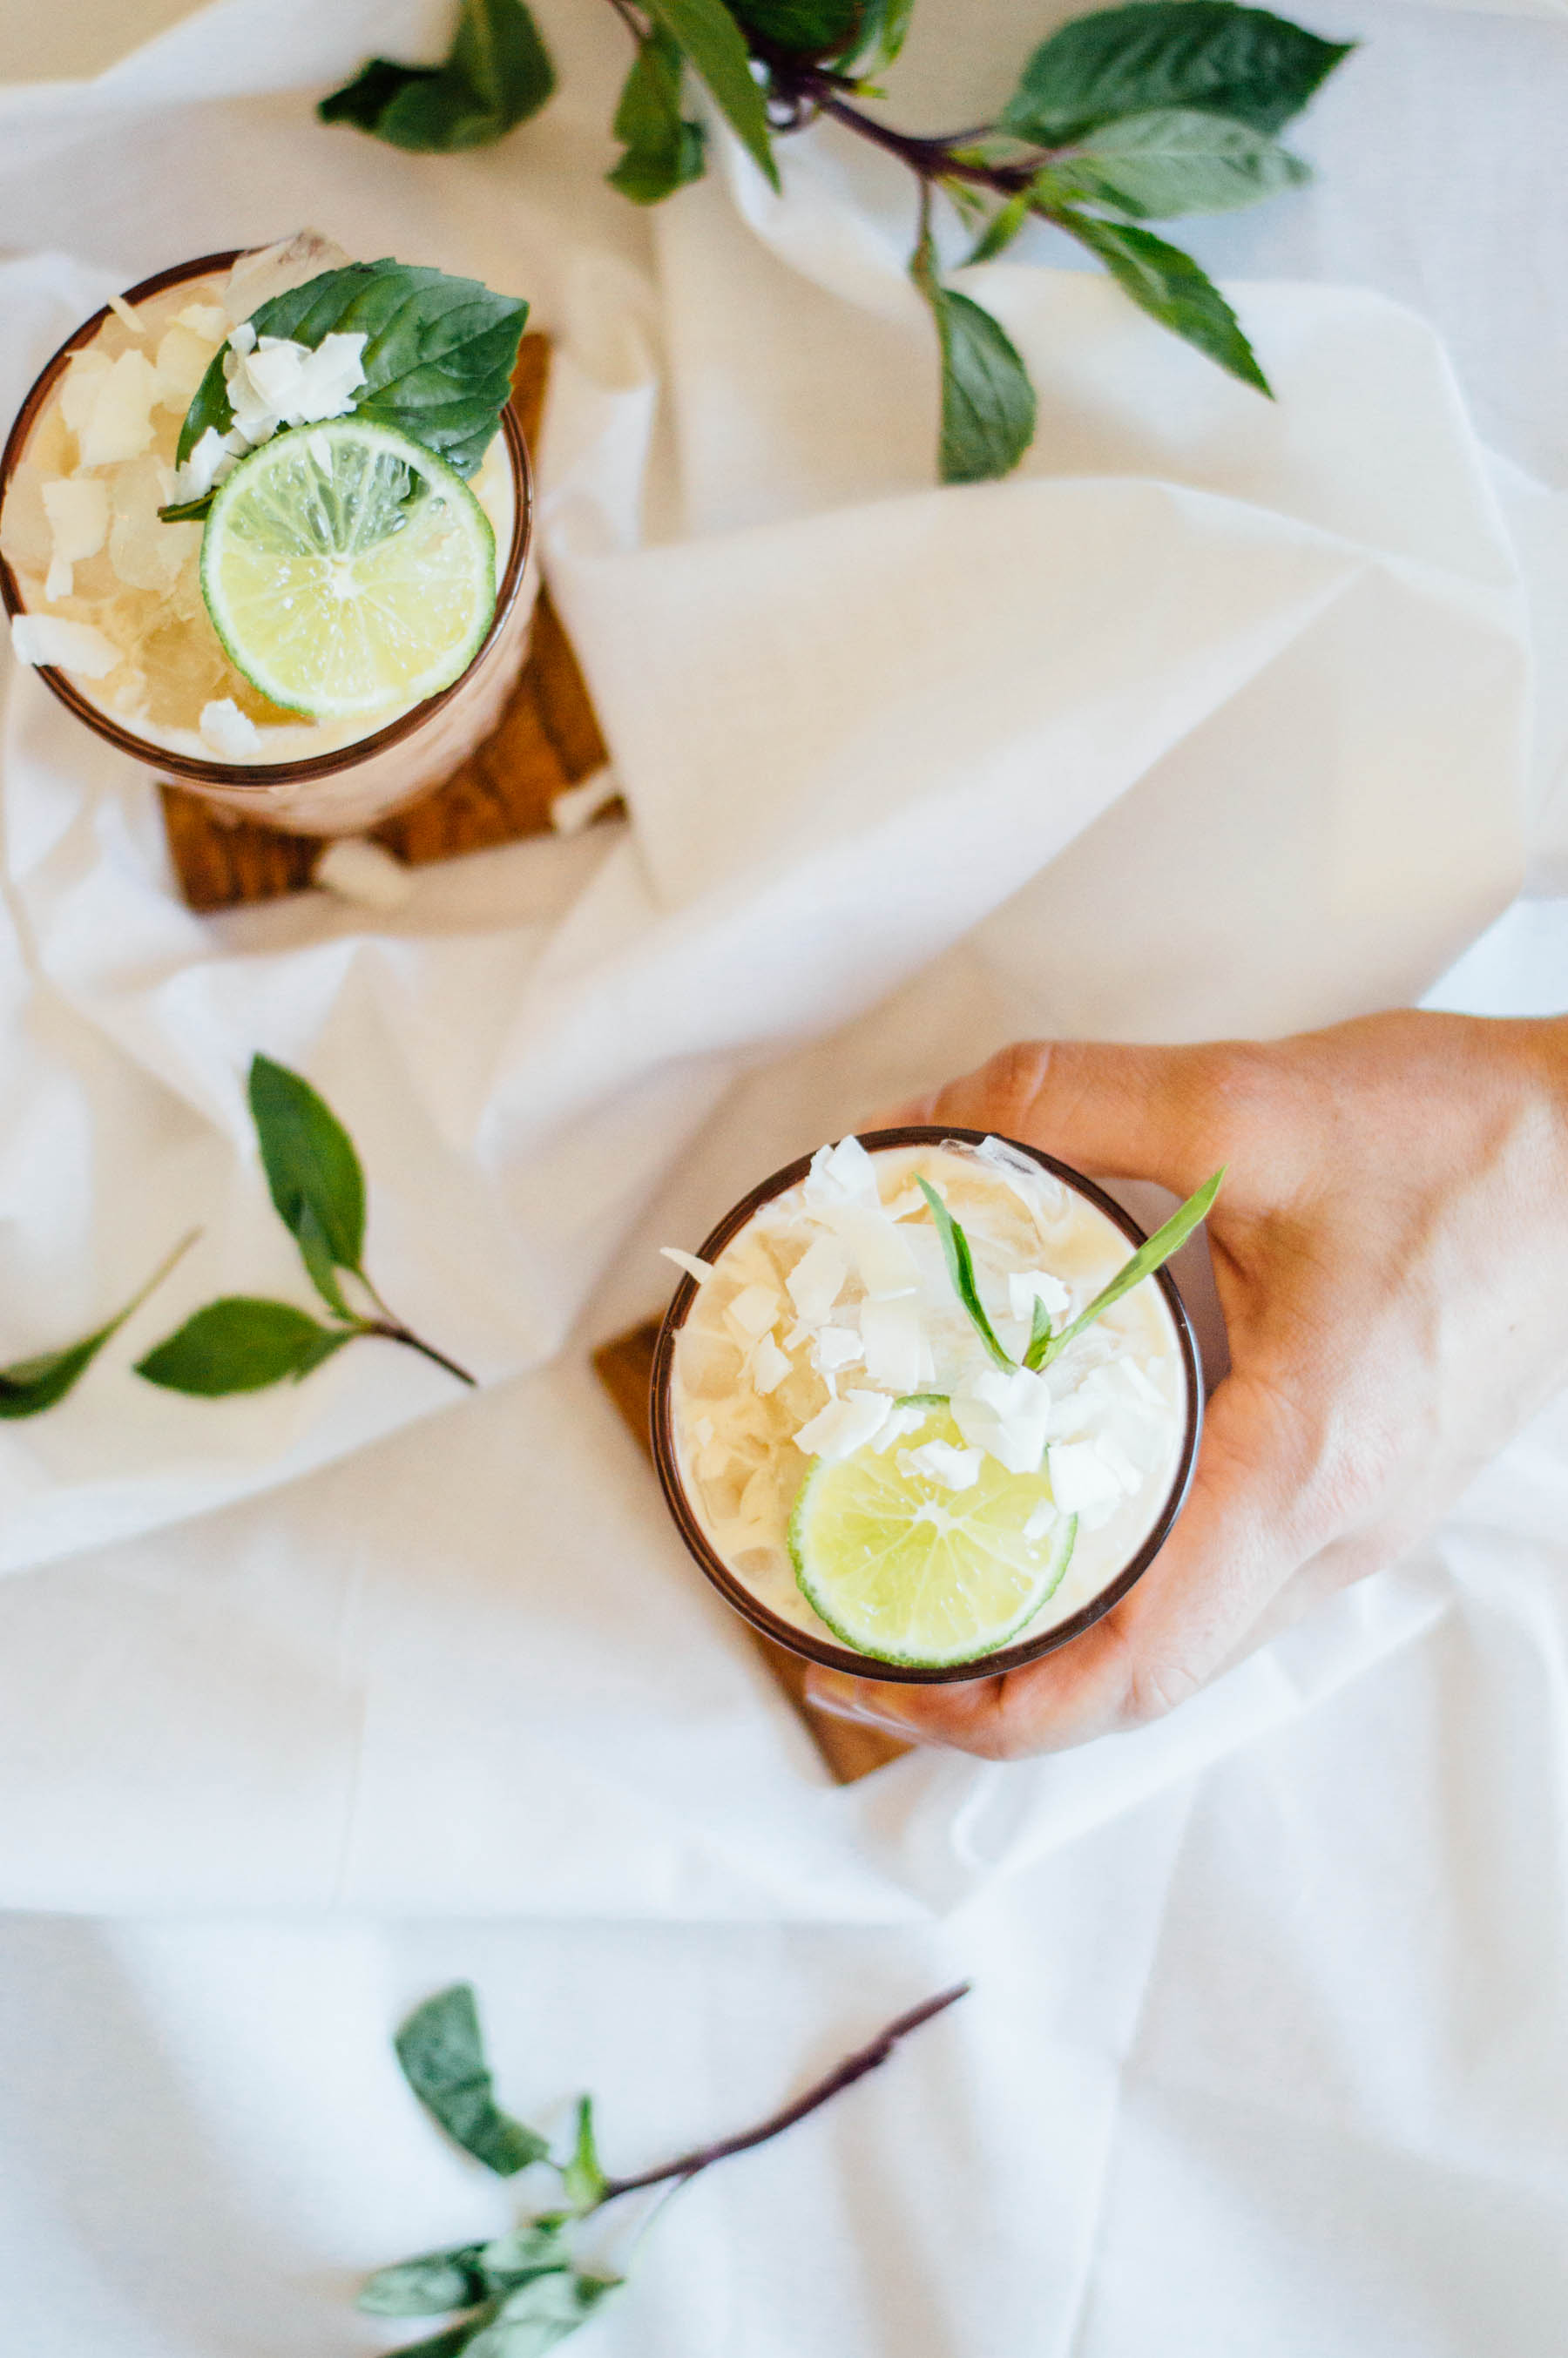 Positively delicious Tropical Rum Coco-Lada cocktail recipe with coconut flavor and a hint of pineapple. SO perfect for any season! | bygabriella.co